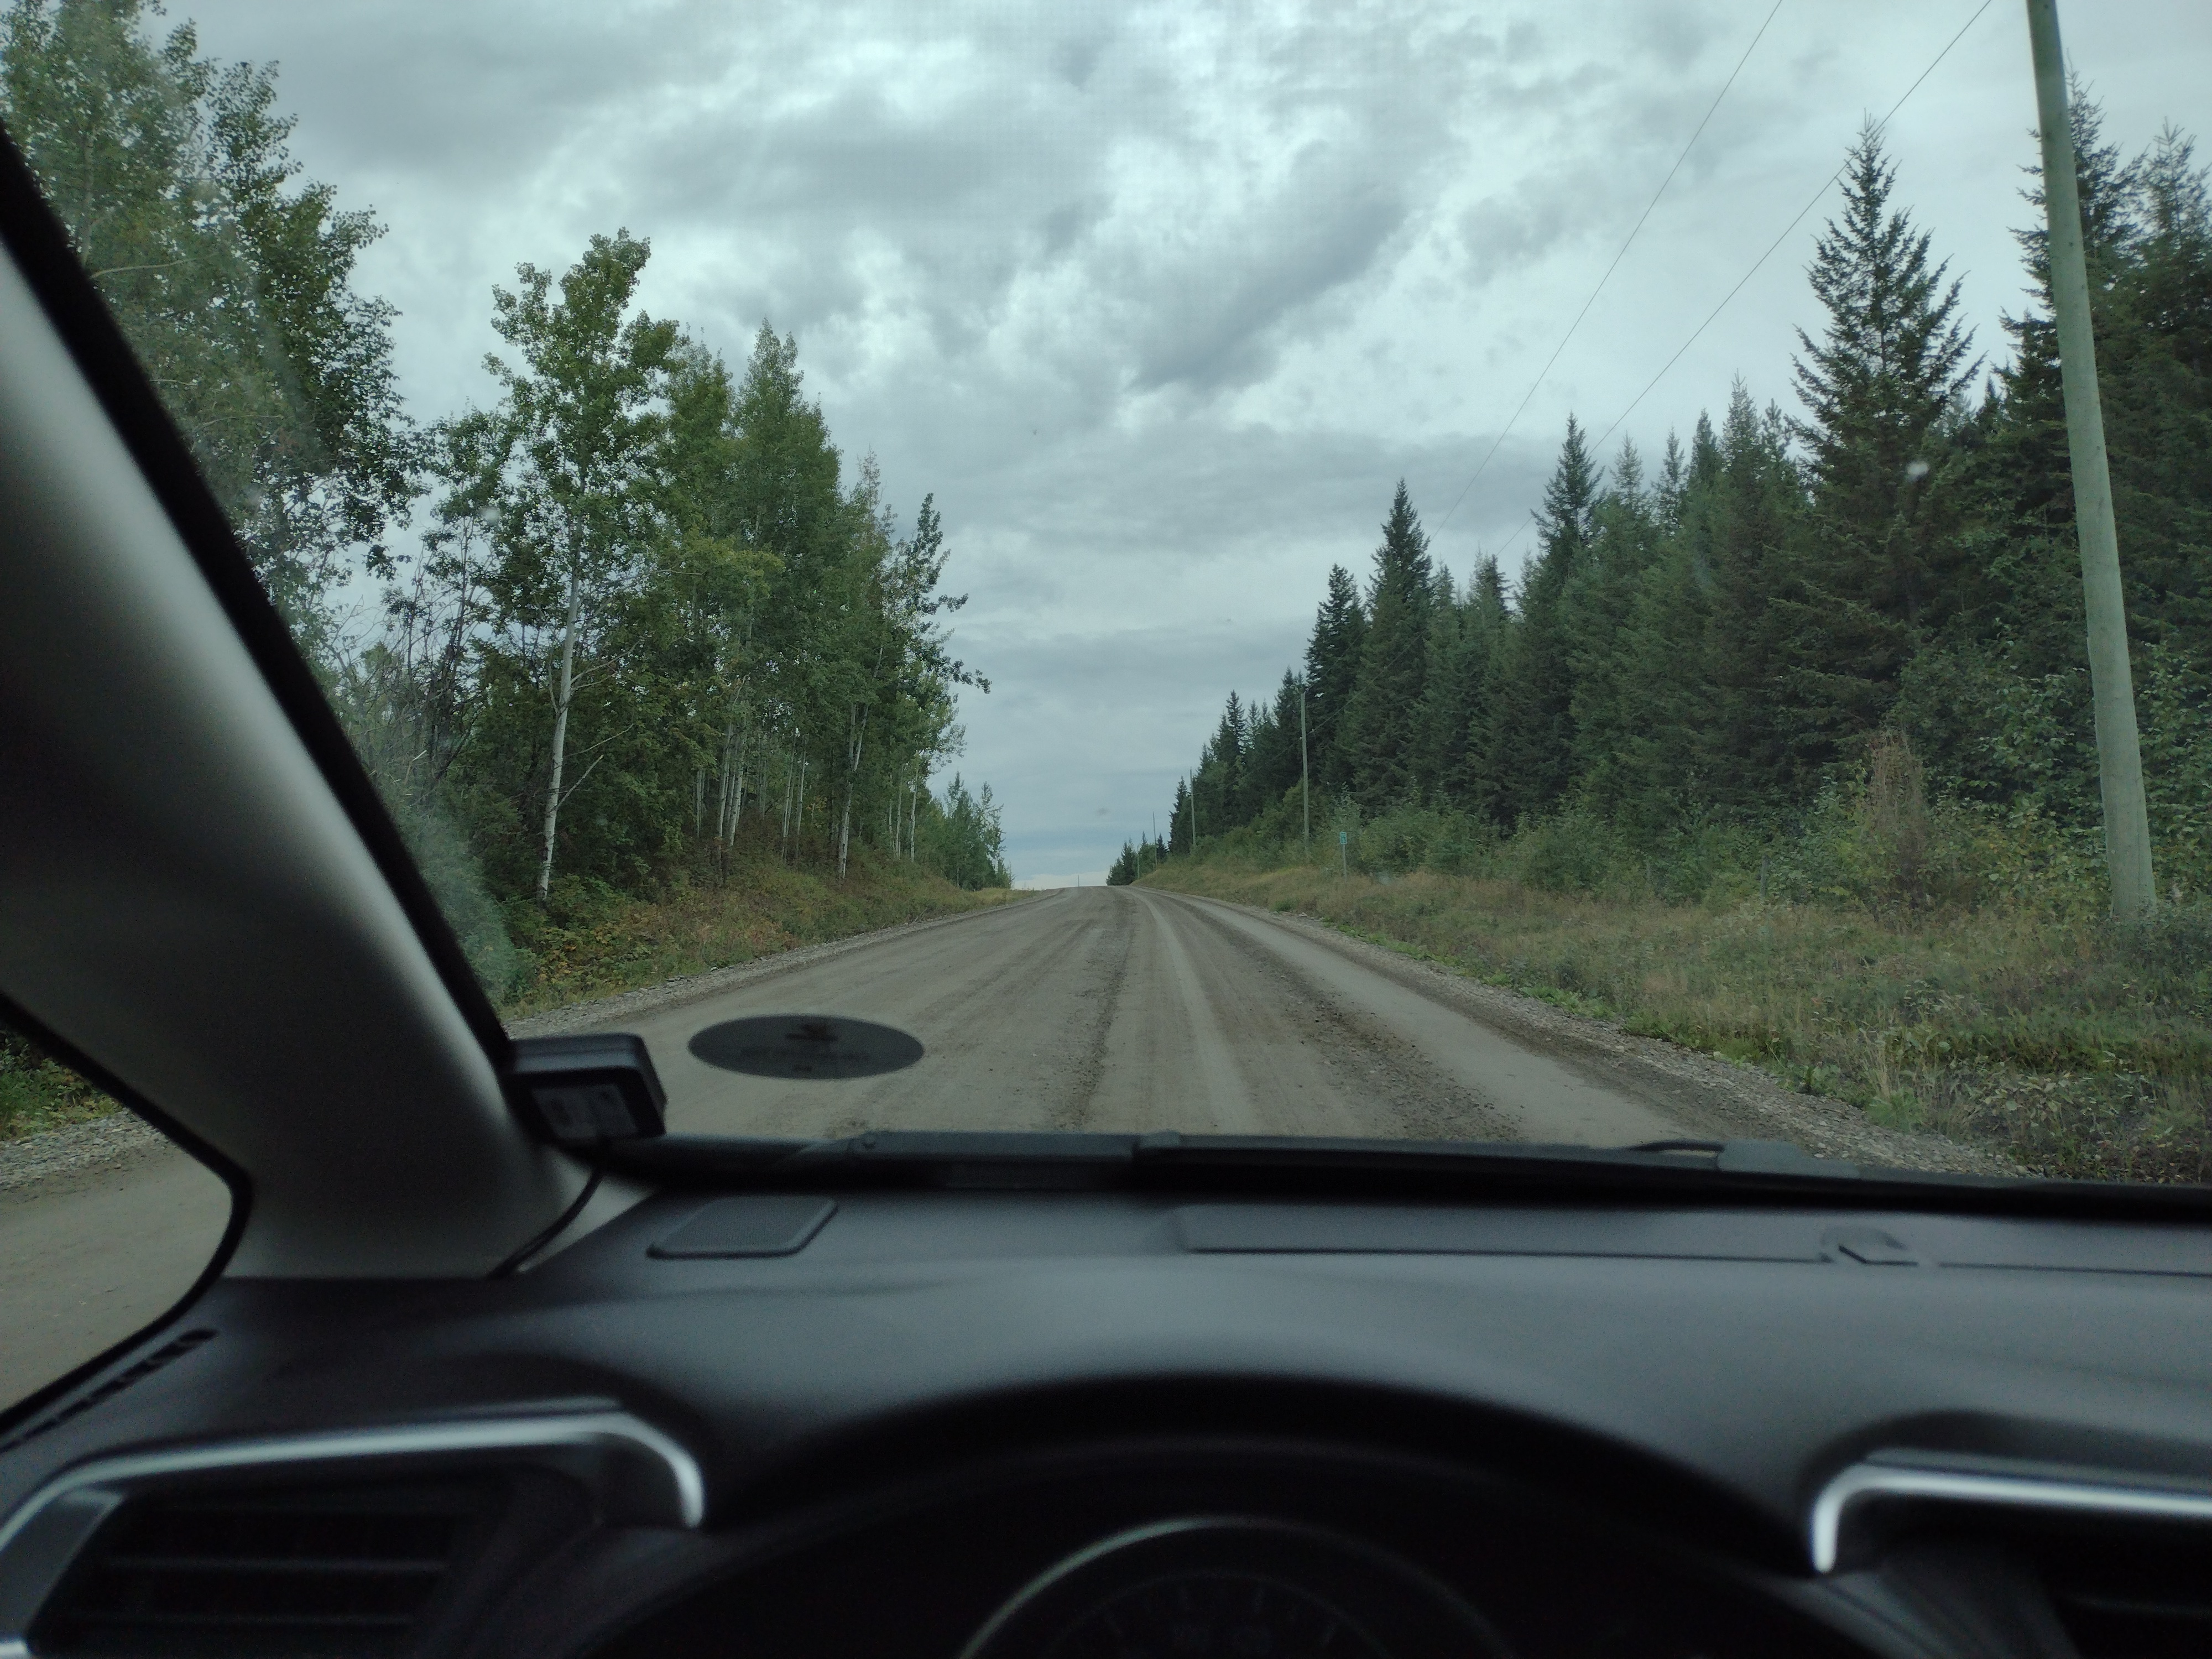 View of a wide dirt road with trees on either side from the inside of the car. The sky is filled with grey clouds.
